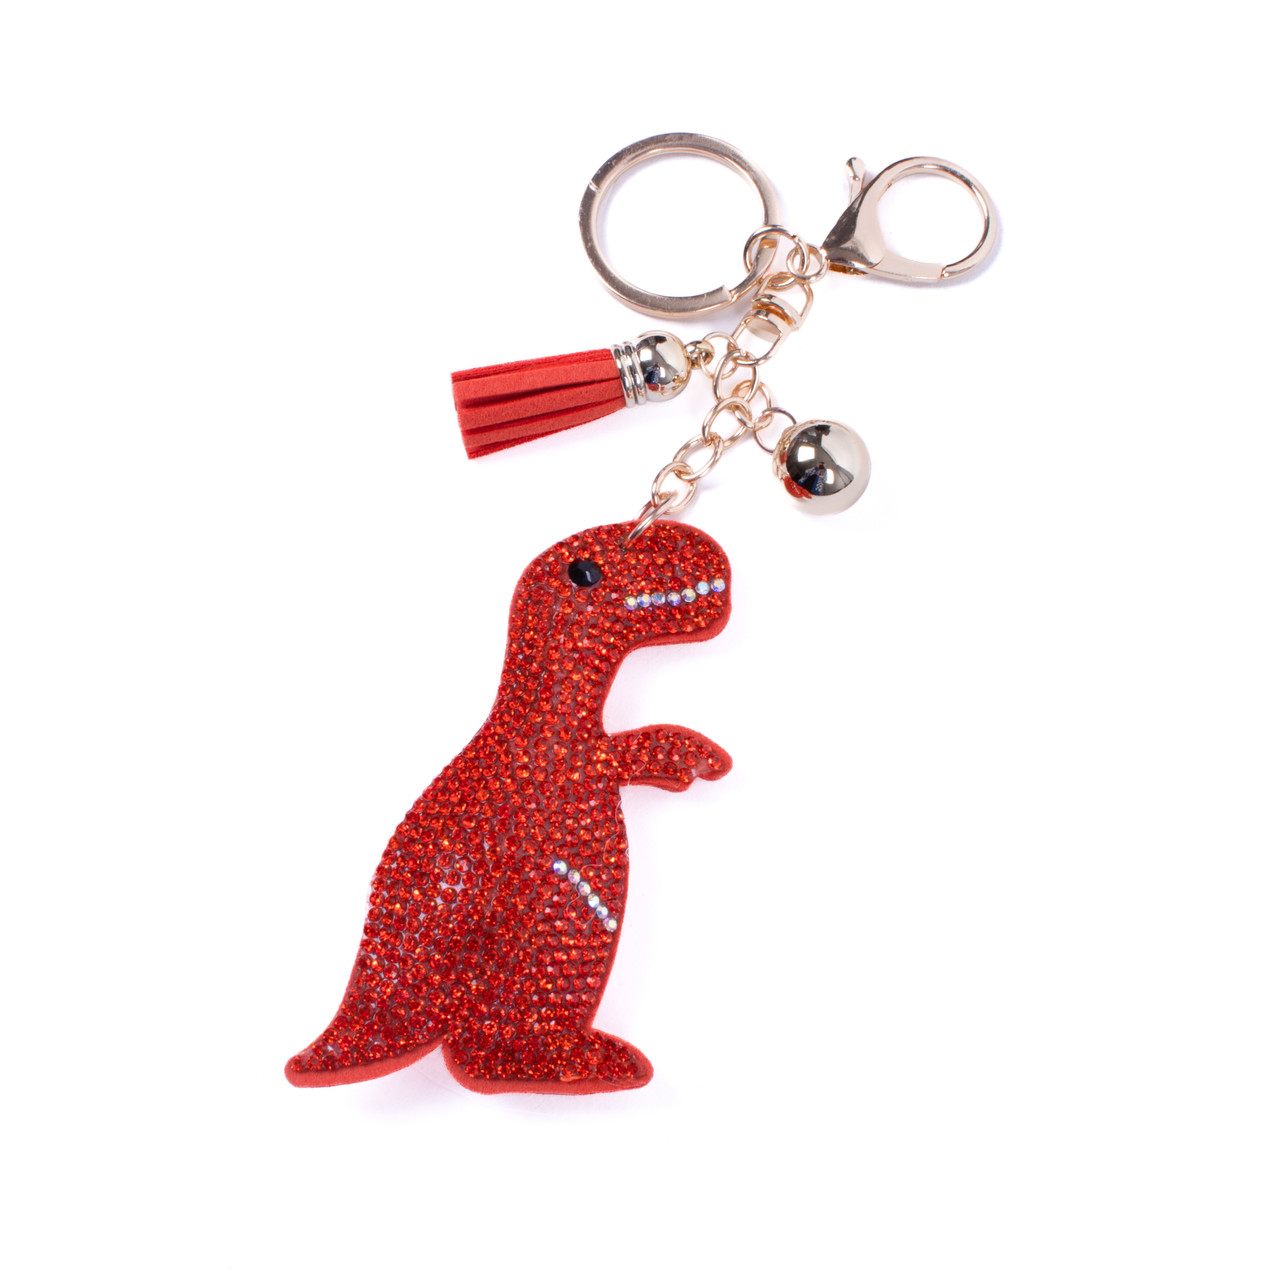 Coach Key ring with dinosaur charm, Women's Accessories